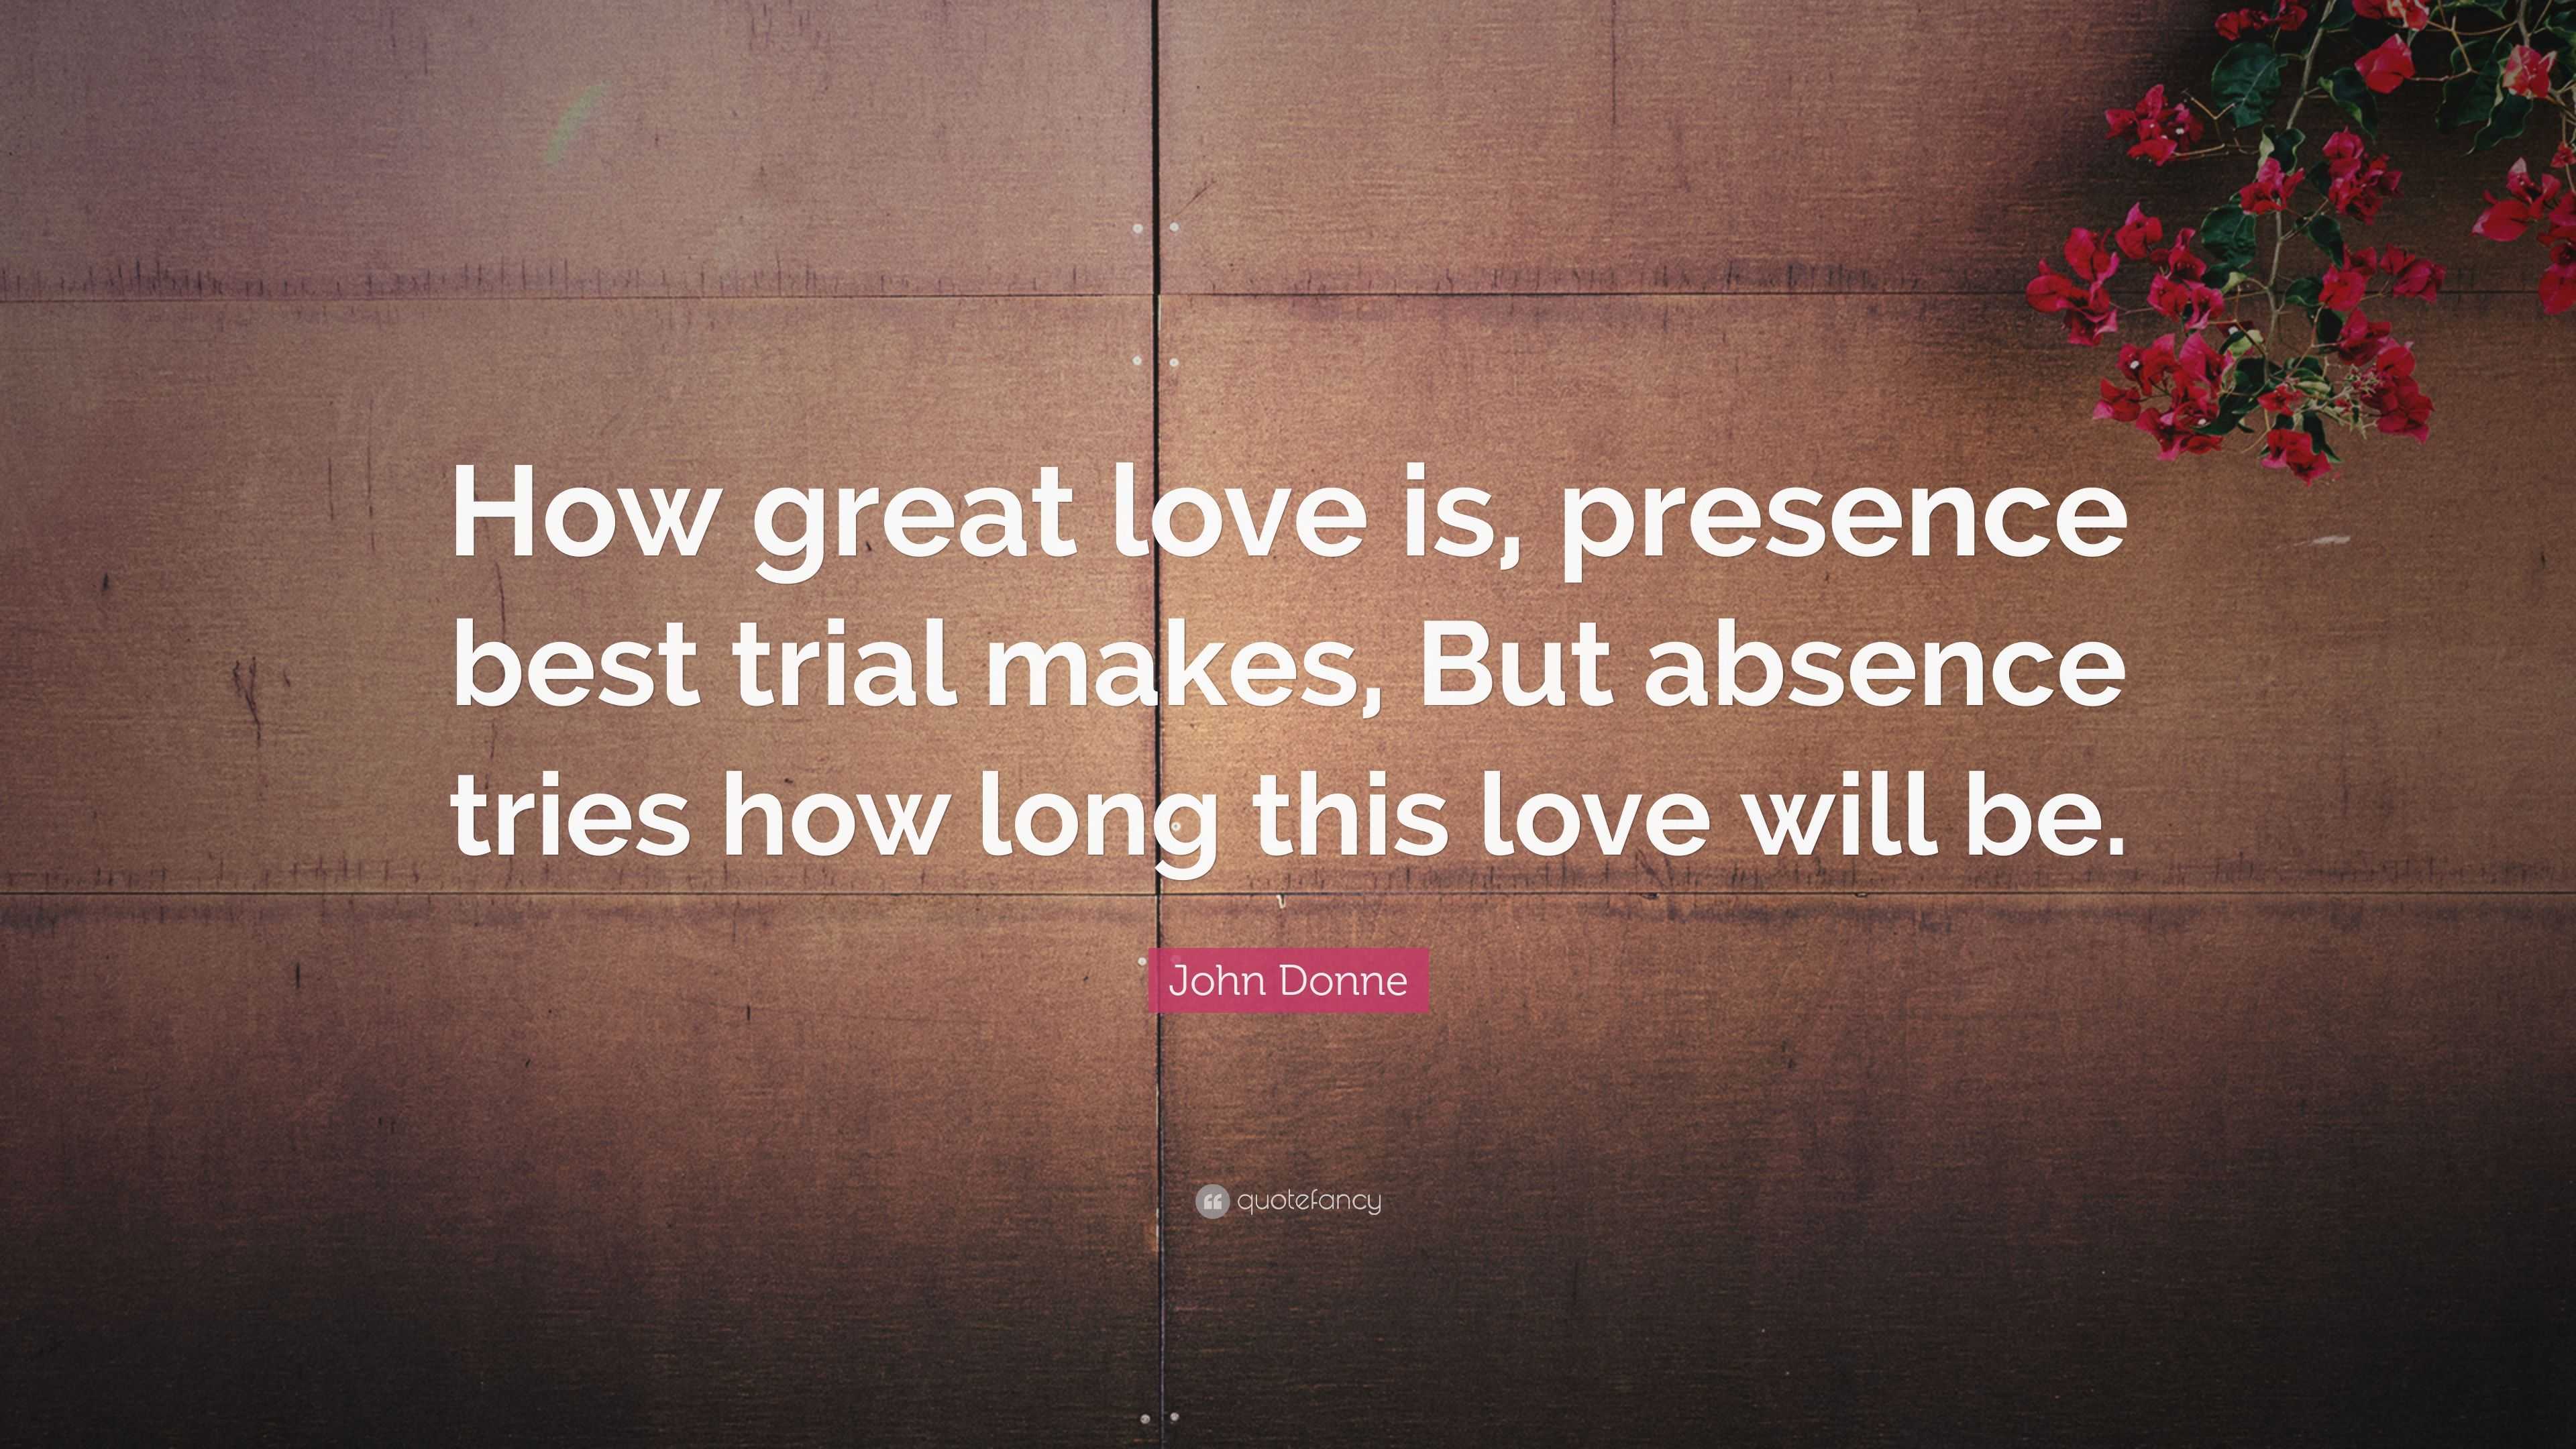 John Donne Quote: “How great love is, presence best trial makes, But ...